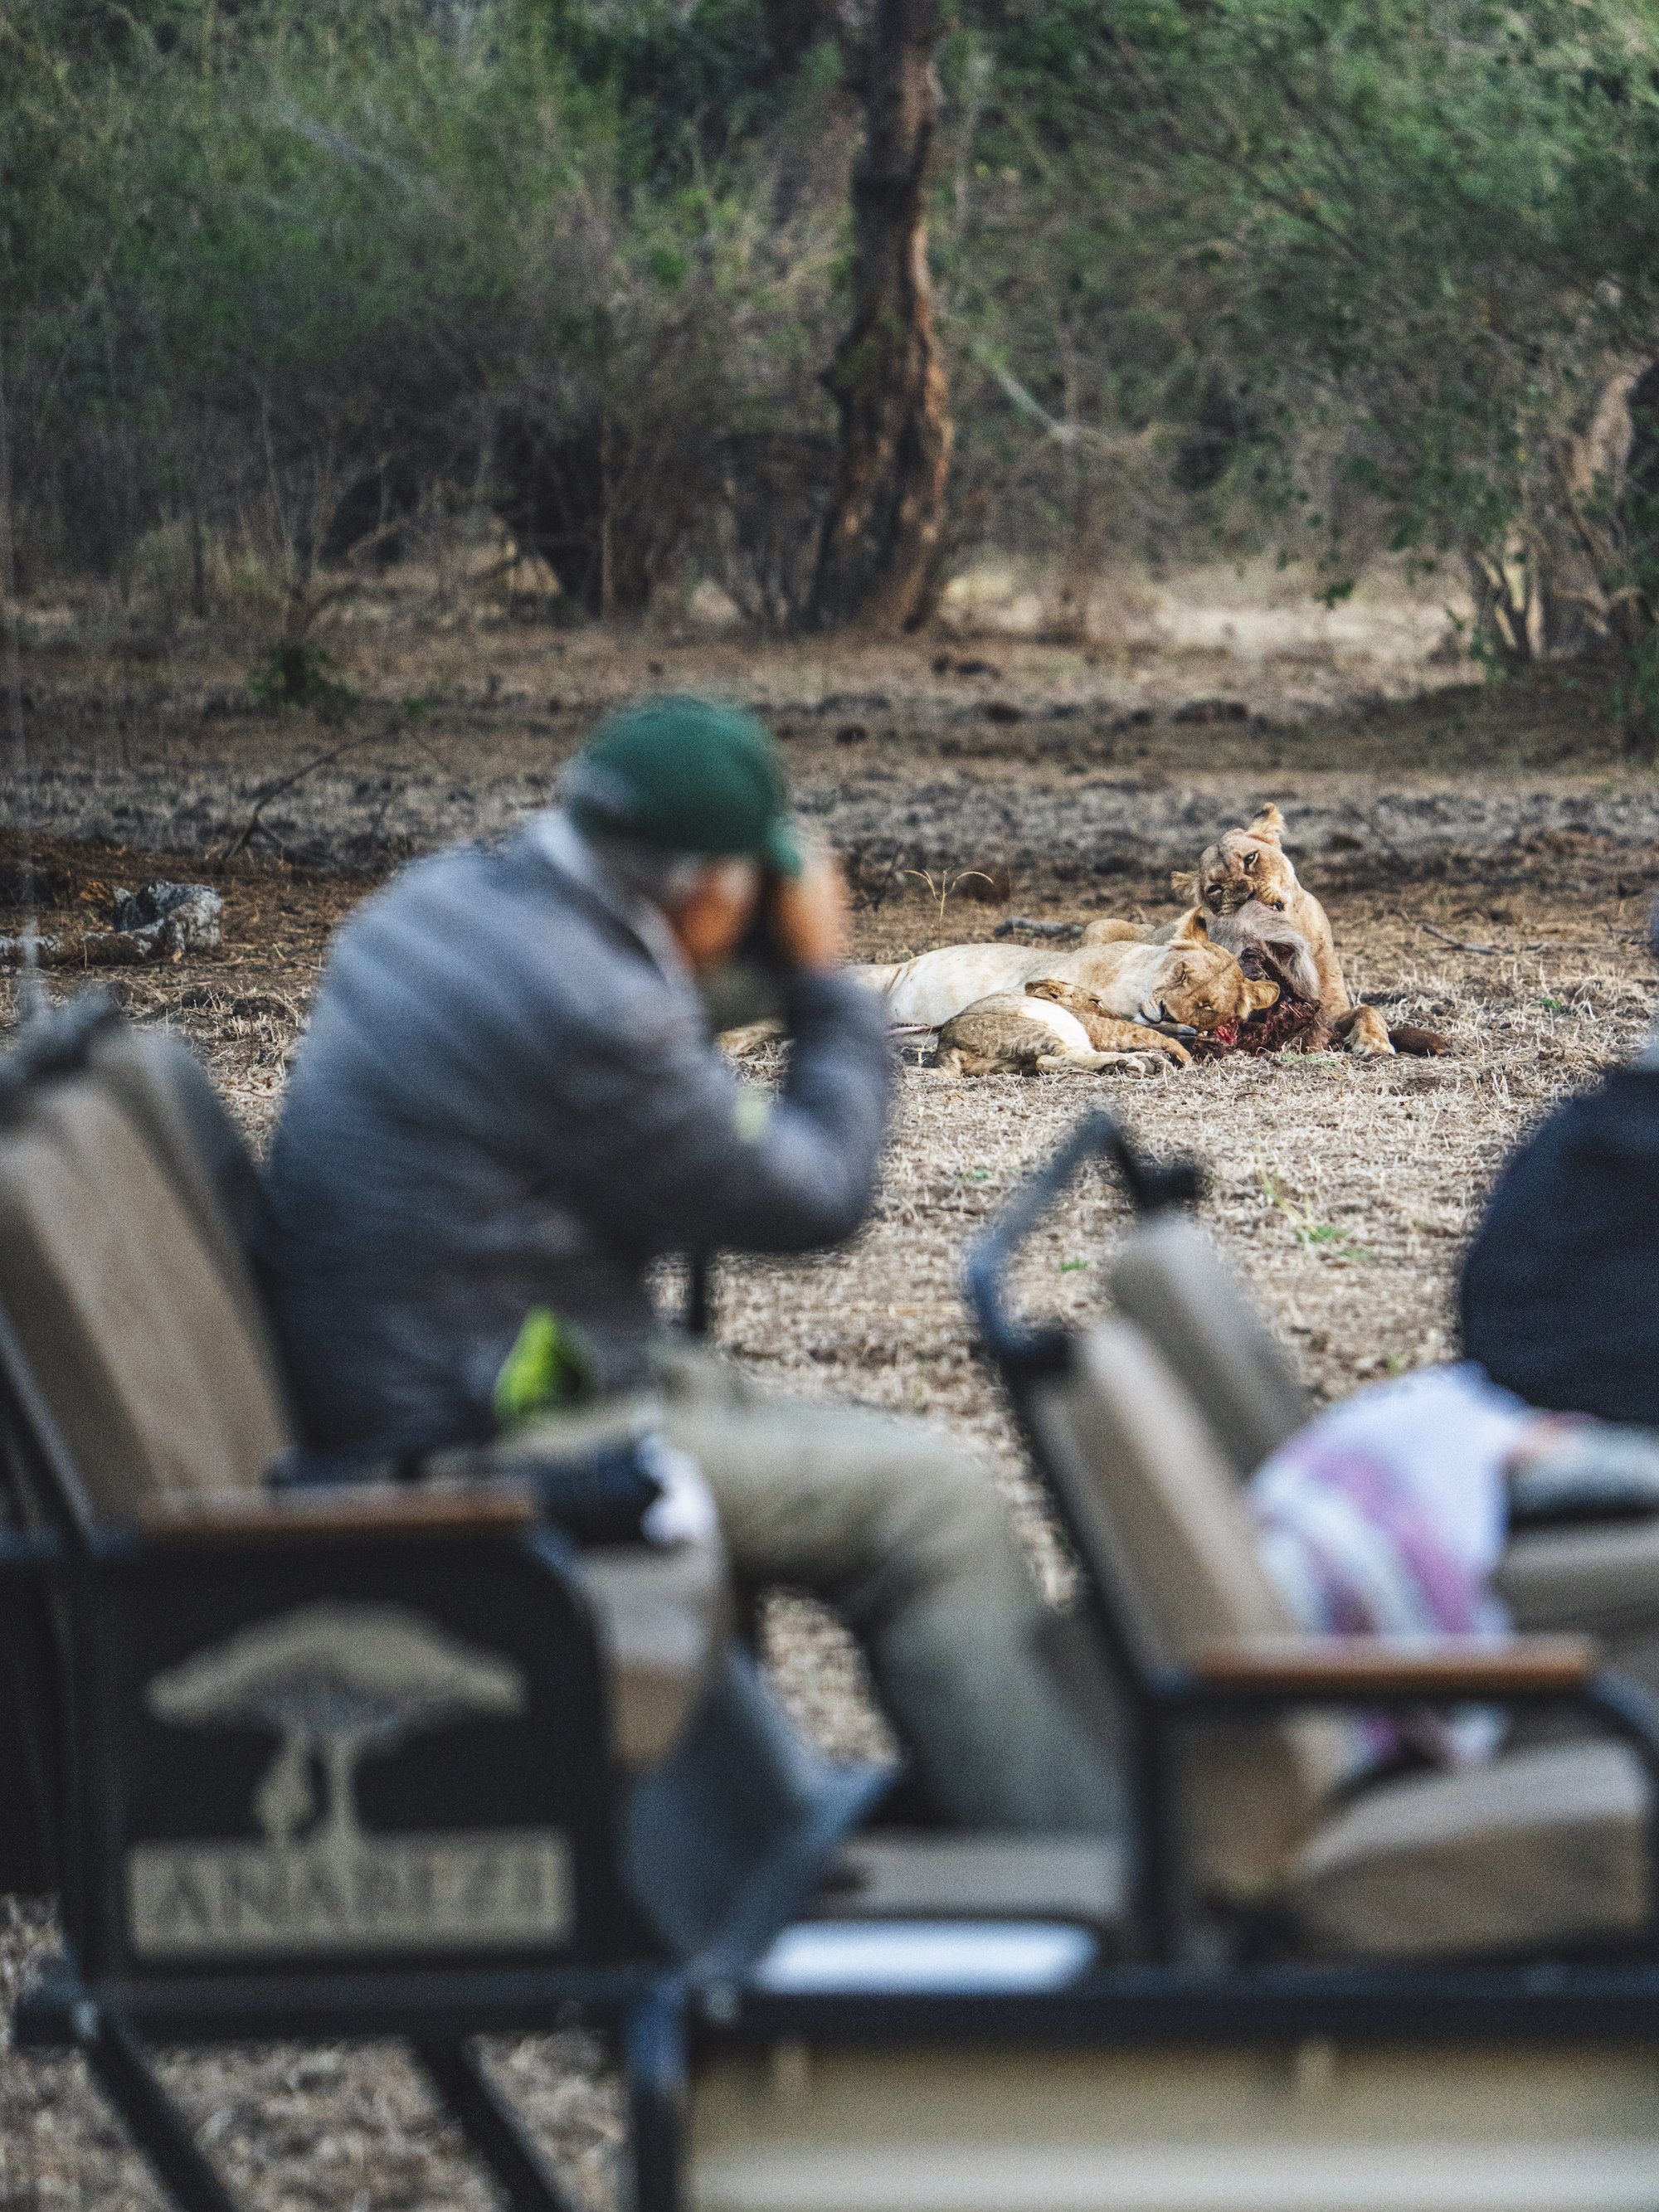 Anabezi's guest photographing wildlife